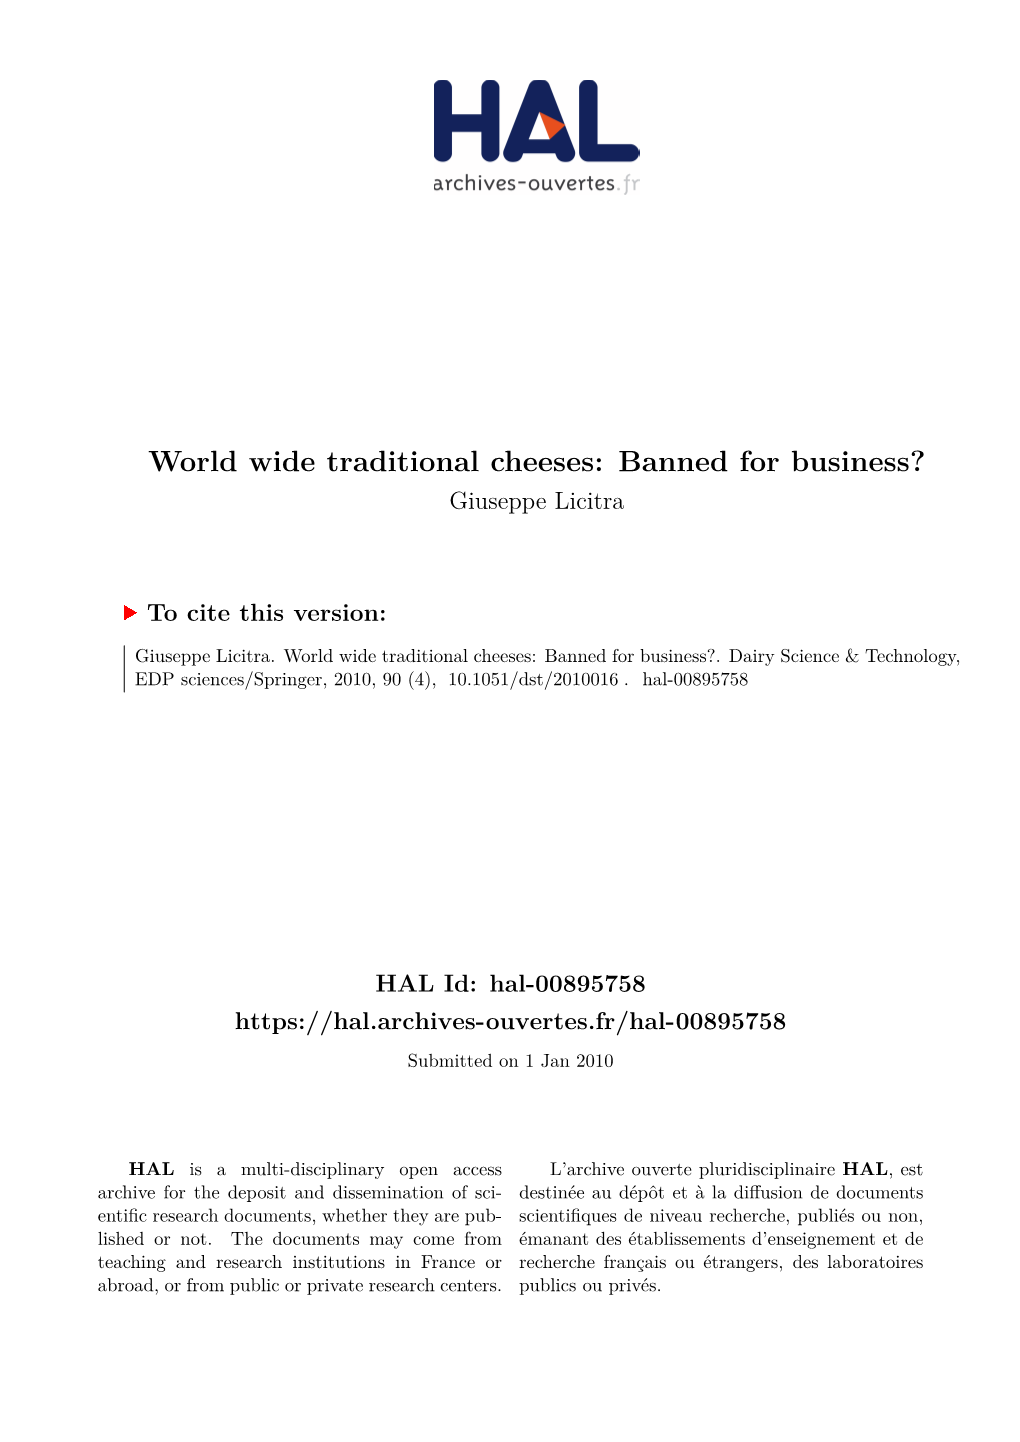 World Wide Traditional Cheeses: Banned for Business? Giuseppe Licitra